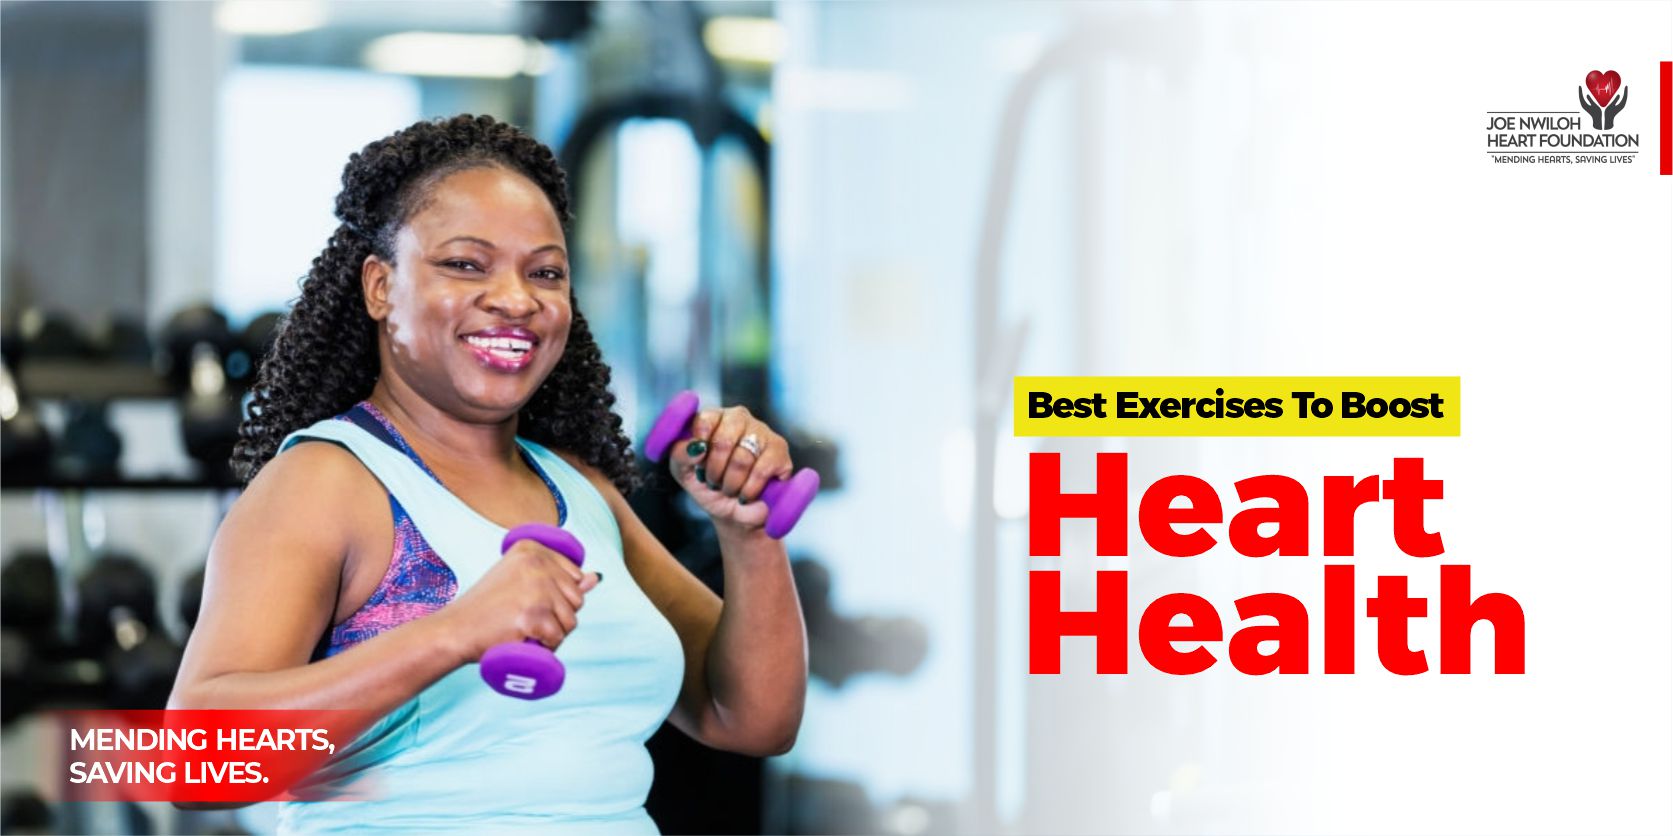 Best Exercises To Boost Heart Health